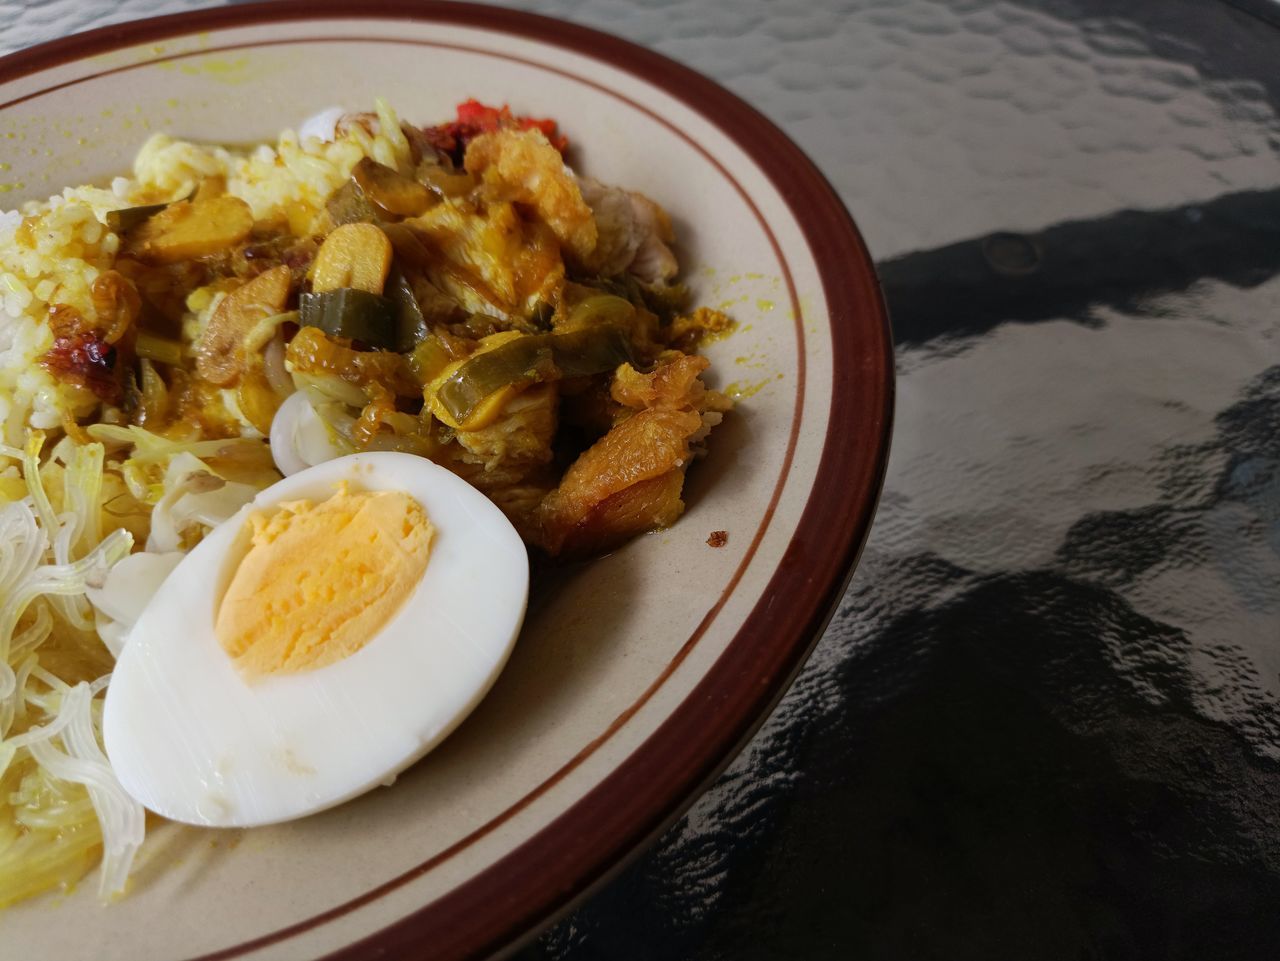 food and drink, food, meal, breakfast, healthy eating, egg, dish, freshness, wellbeing, cuisine, plate, no people, fried, table, meat, asian food, indoors, produce, curry, high angle view, vegetarian food, fast food, vegetable